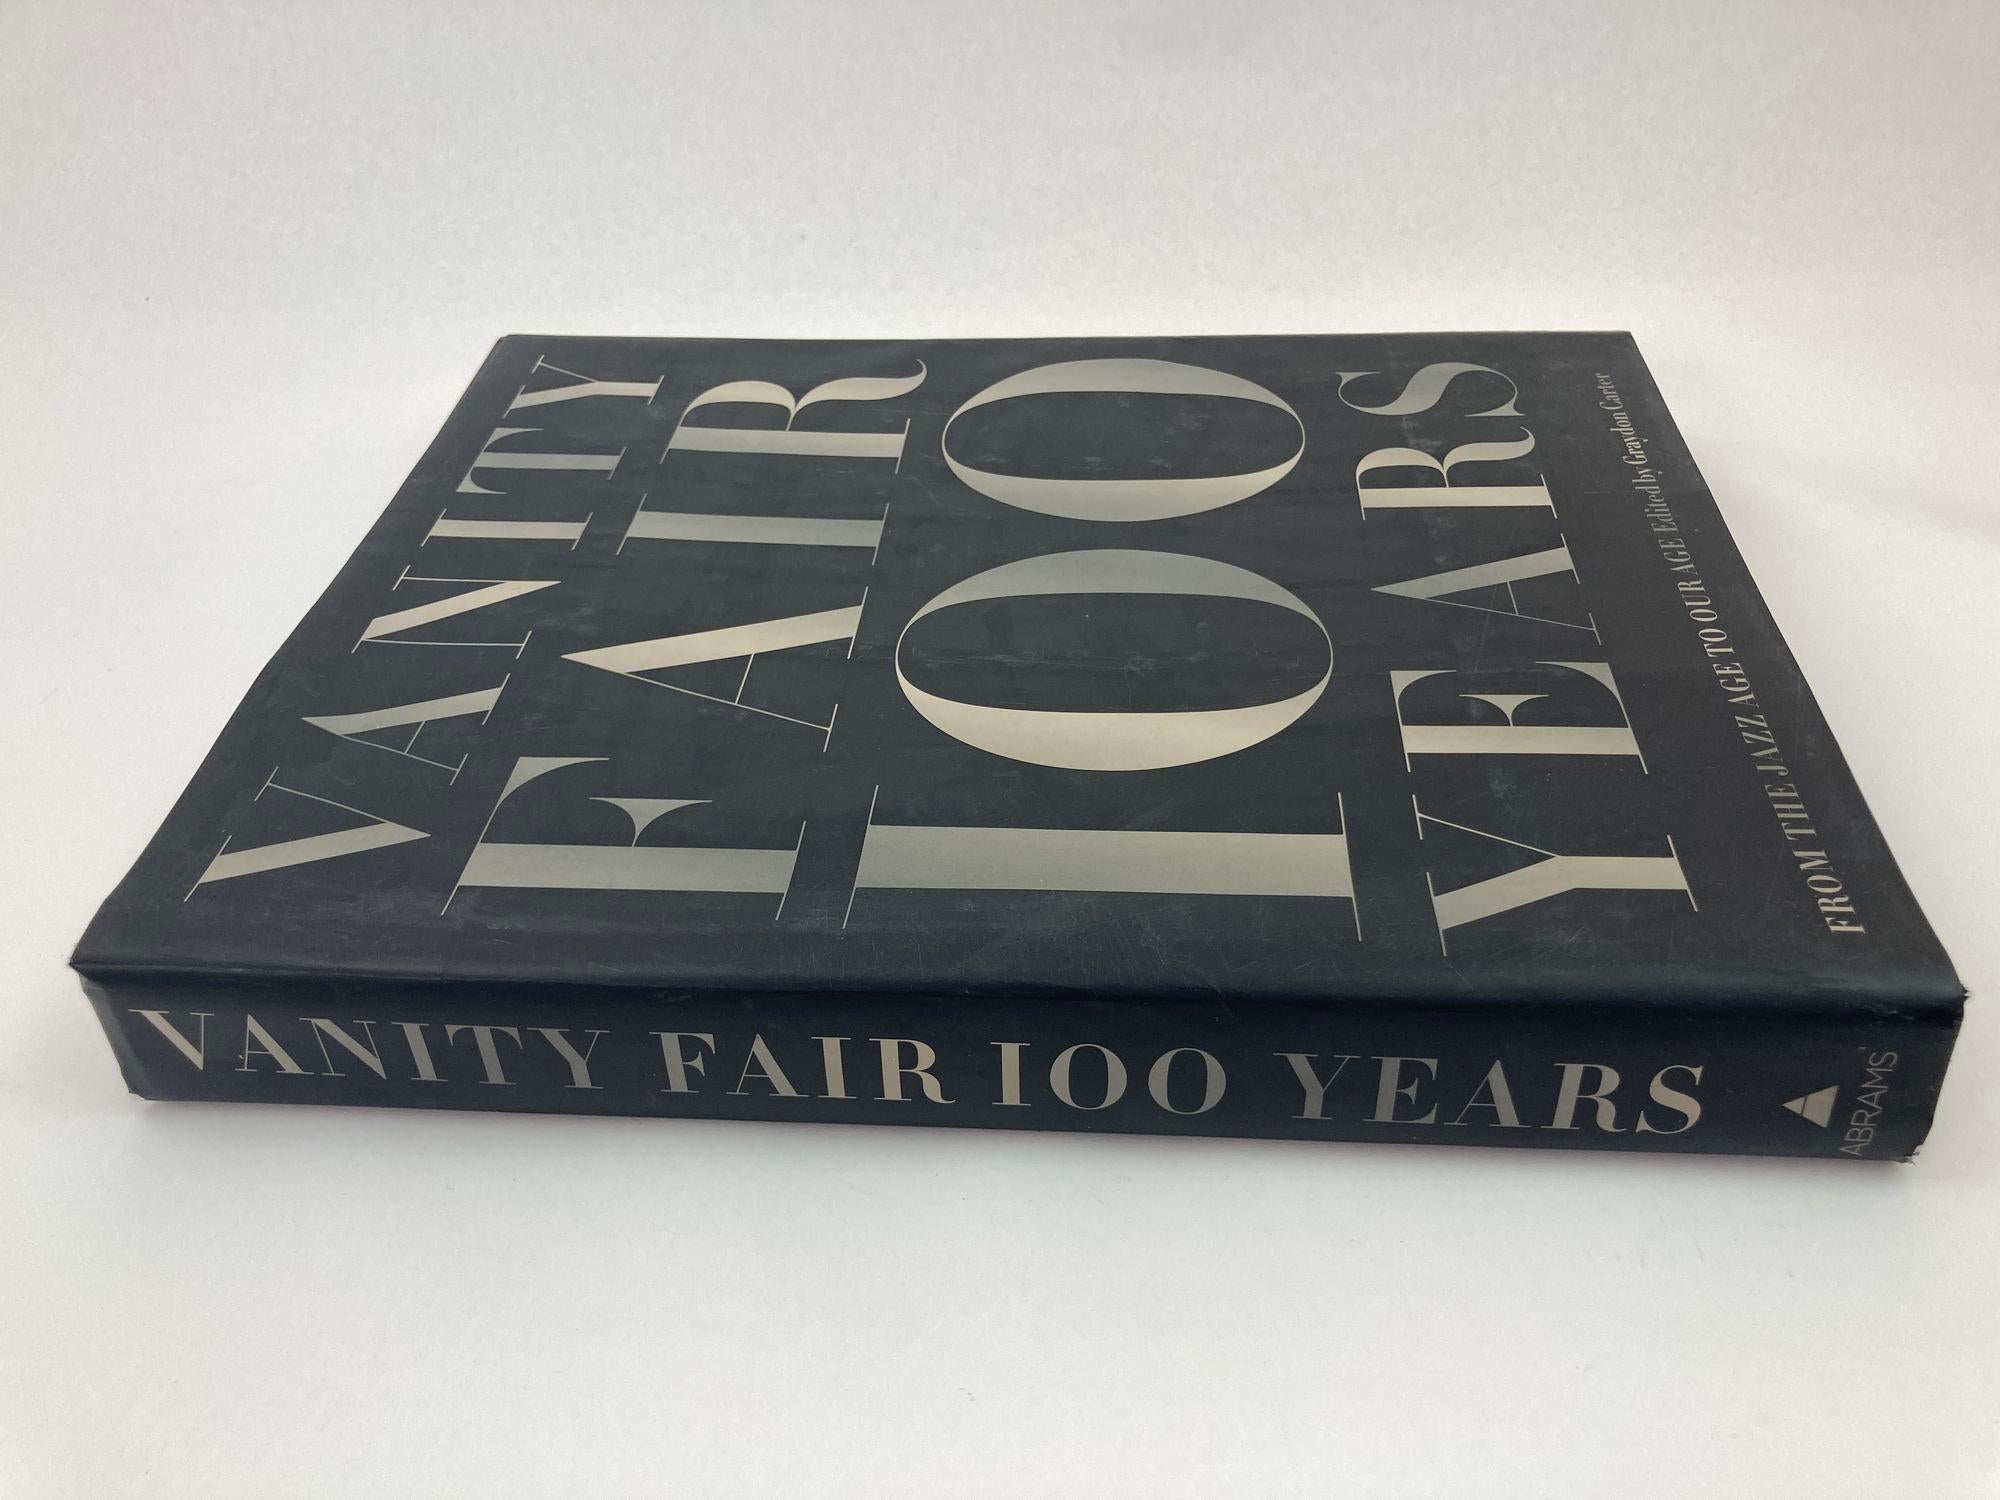 Vanity Fair 100 Years From the Jazz Age to Our Age 2013 Großes Hardcoverbuch (amerikanisch) im Angebot